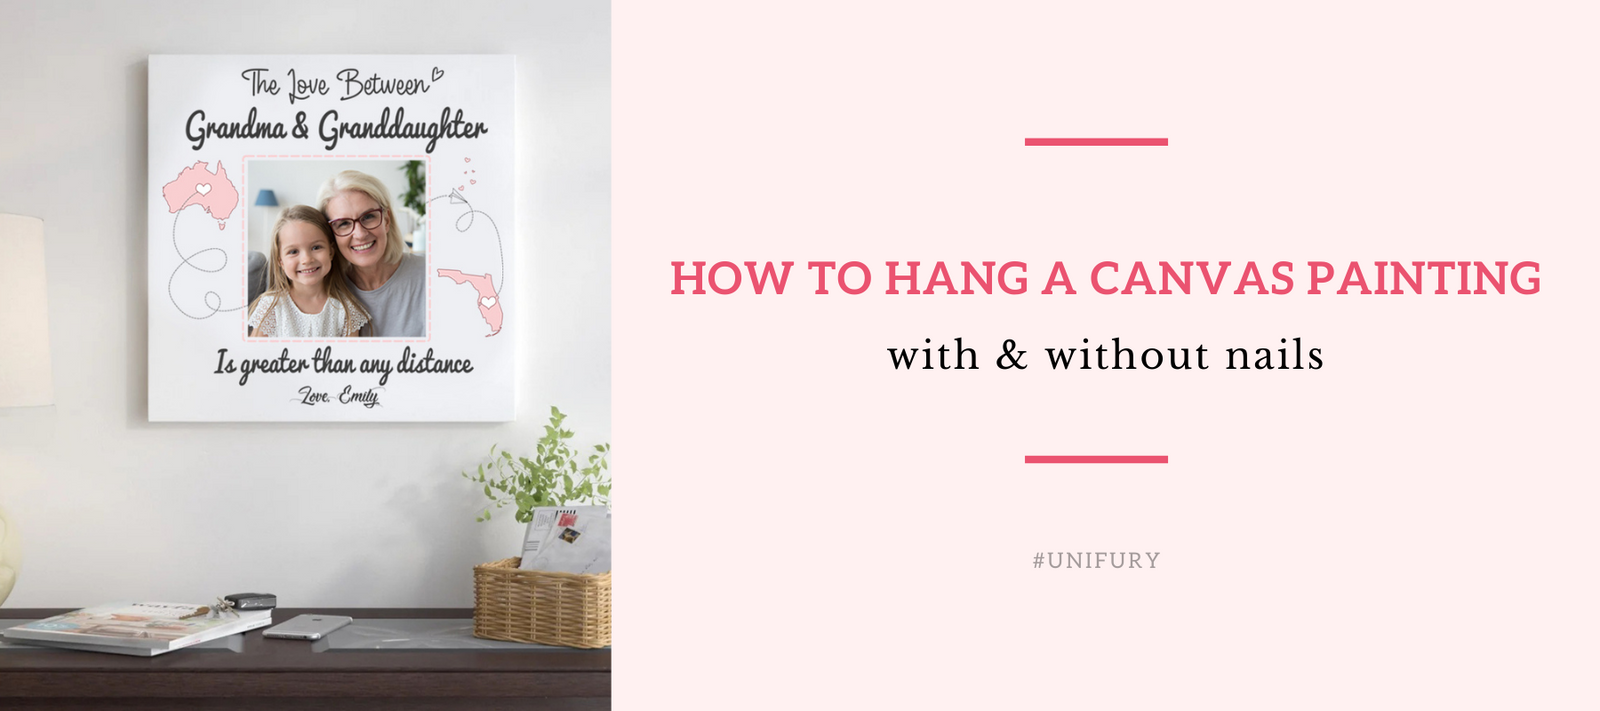 The Frame Room Frame & Design Blog - How to Hang Picture Frames Without  Nails | The Frame Room Baltimore, Maryland